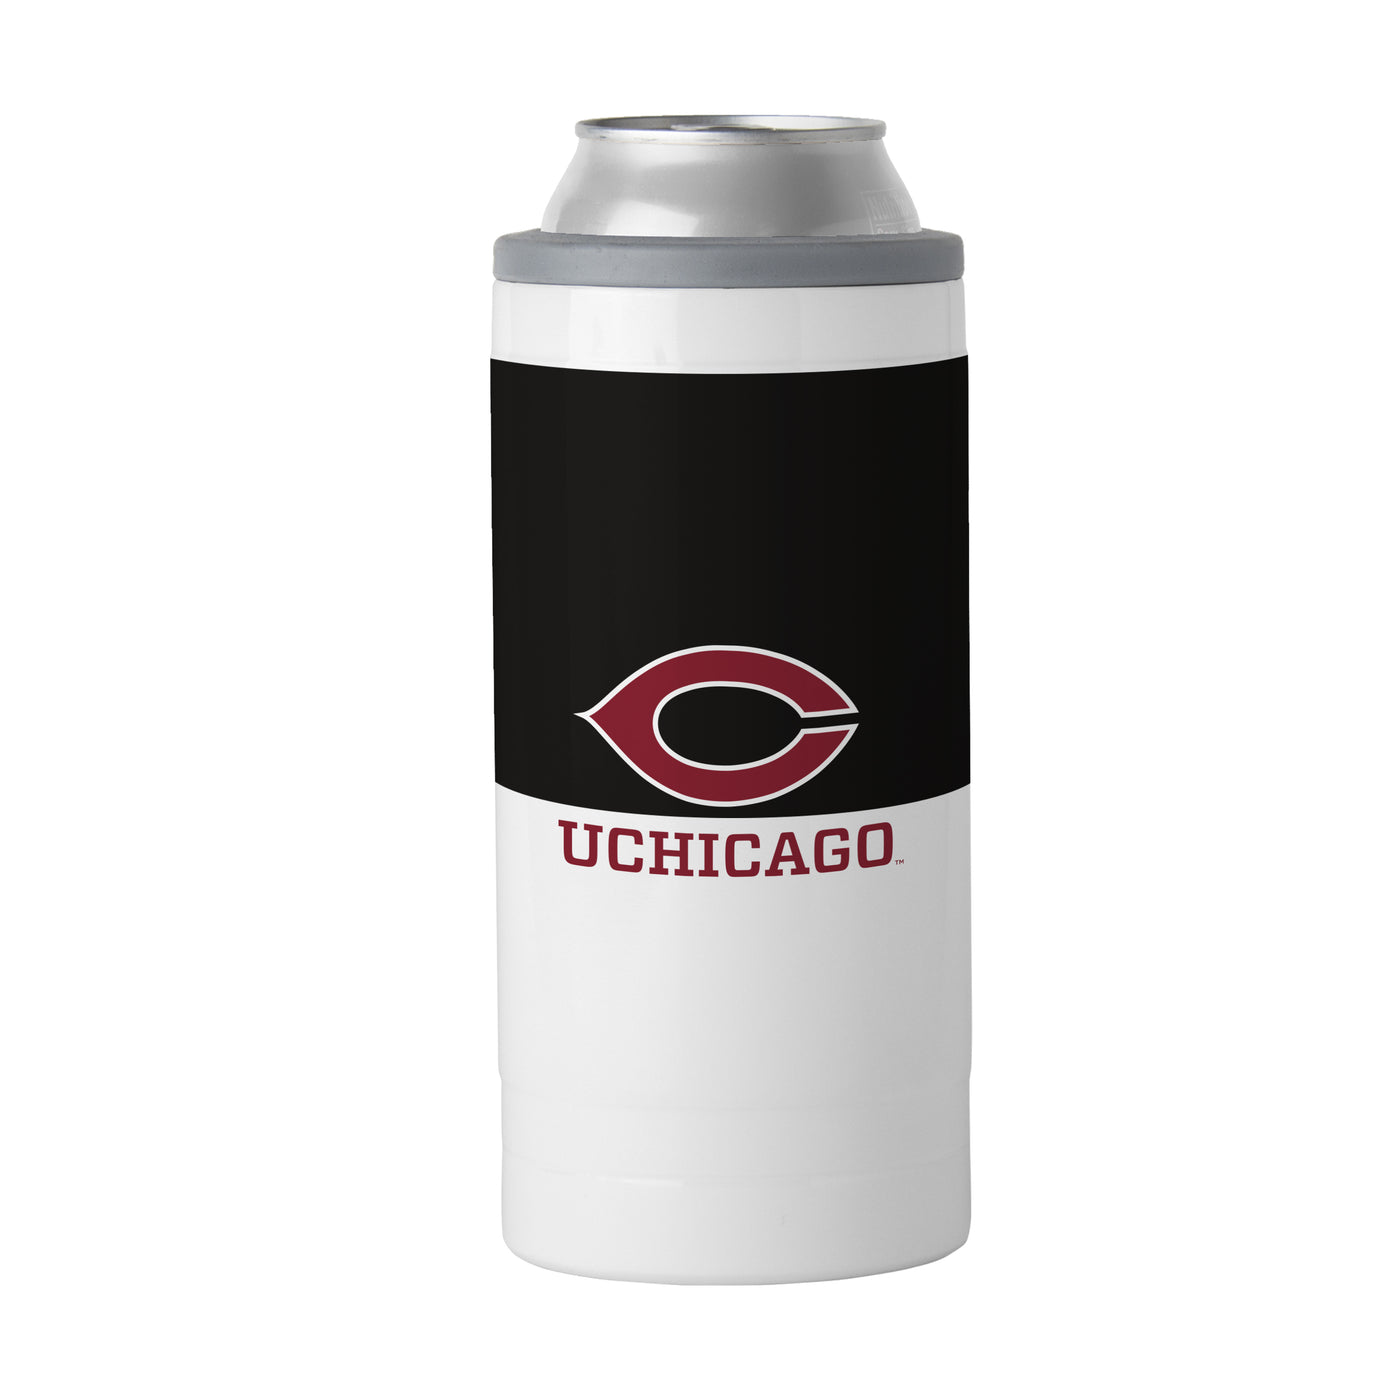 Univ of Chicago 12oz Colorblock Slim Can Coolie